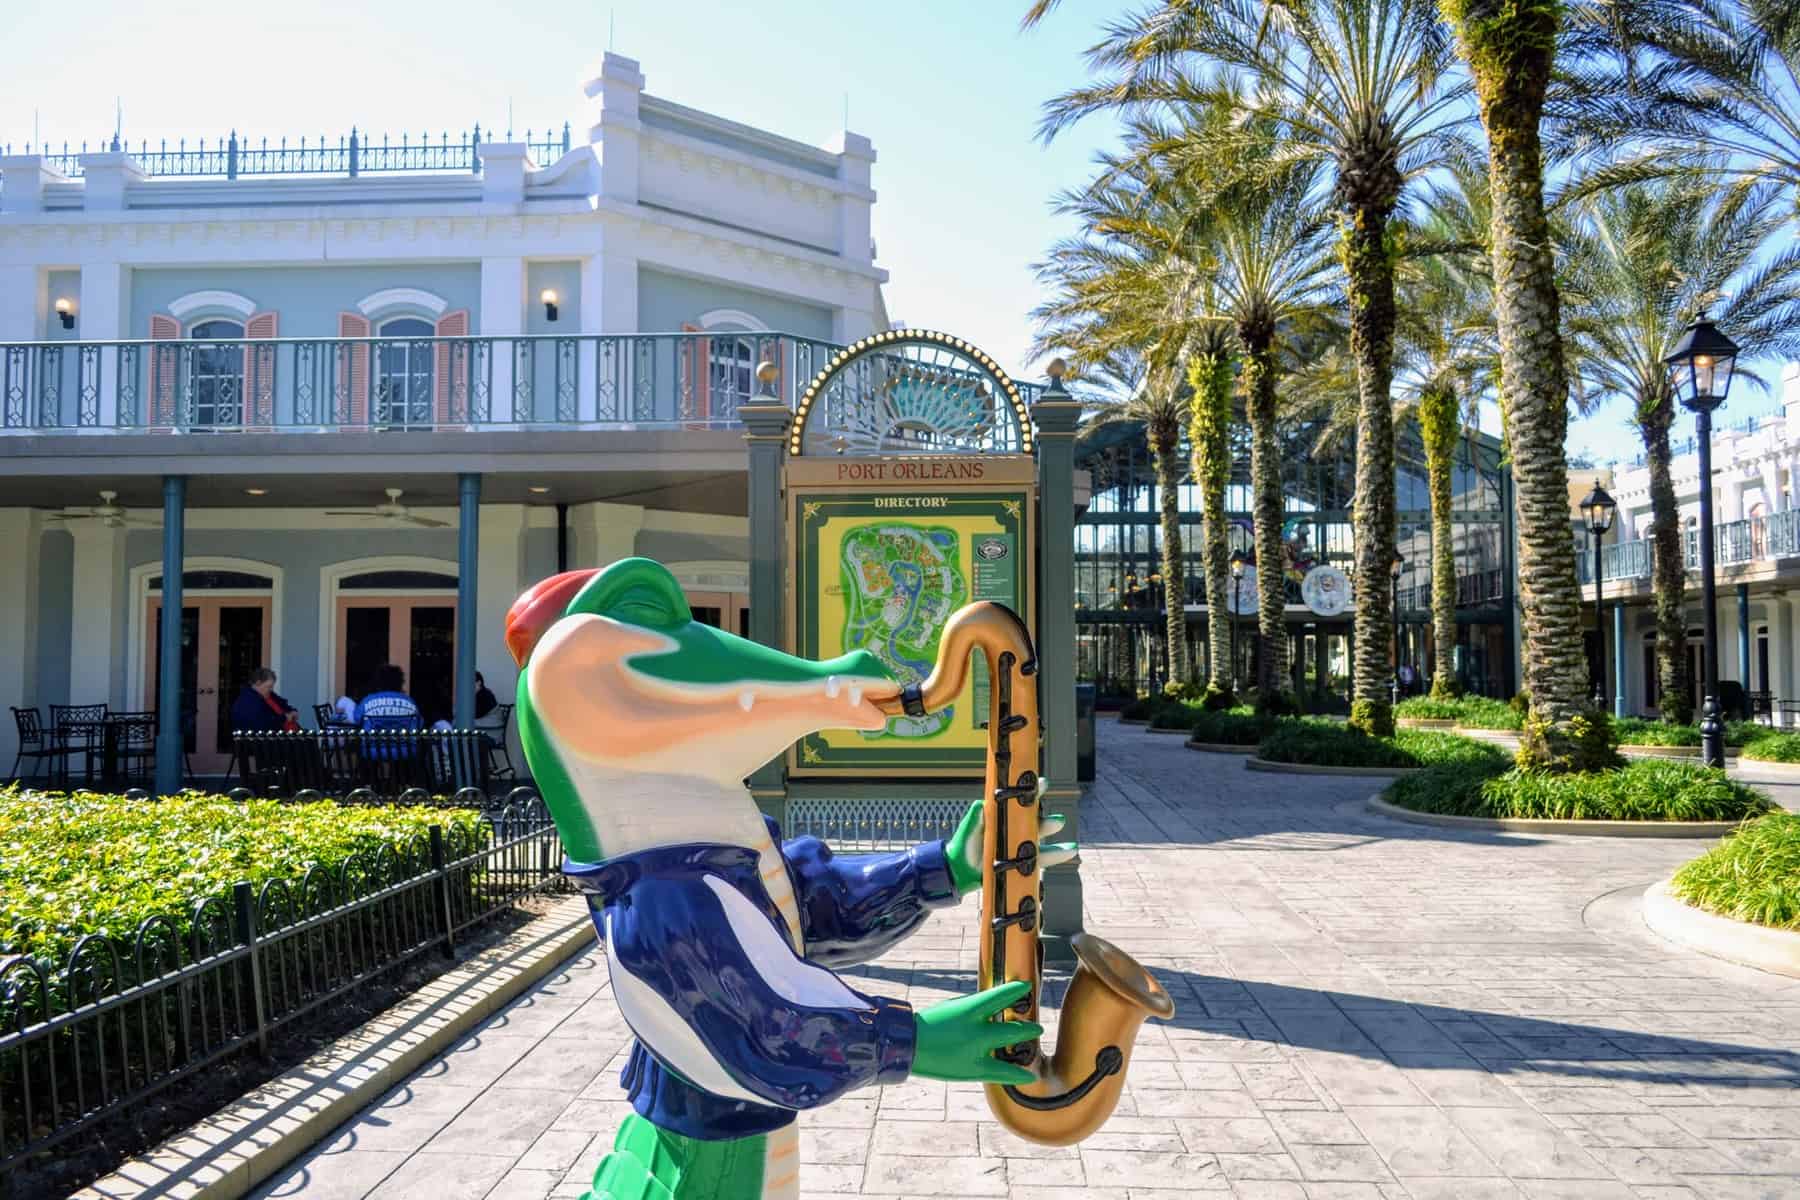 Reopening Dates Announced For Port Orleans Resorts, All-Star Music & Sports